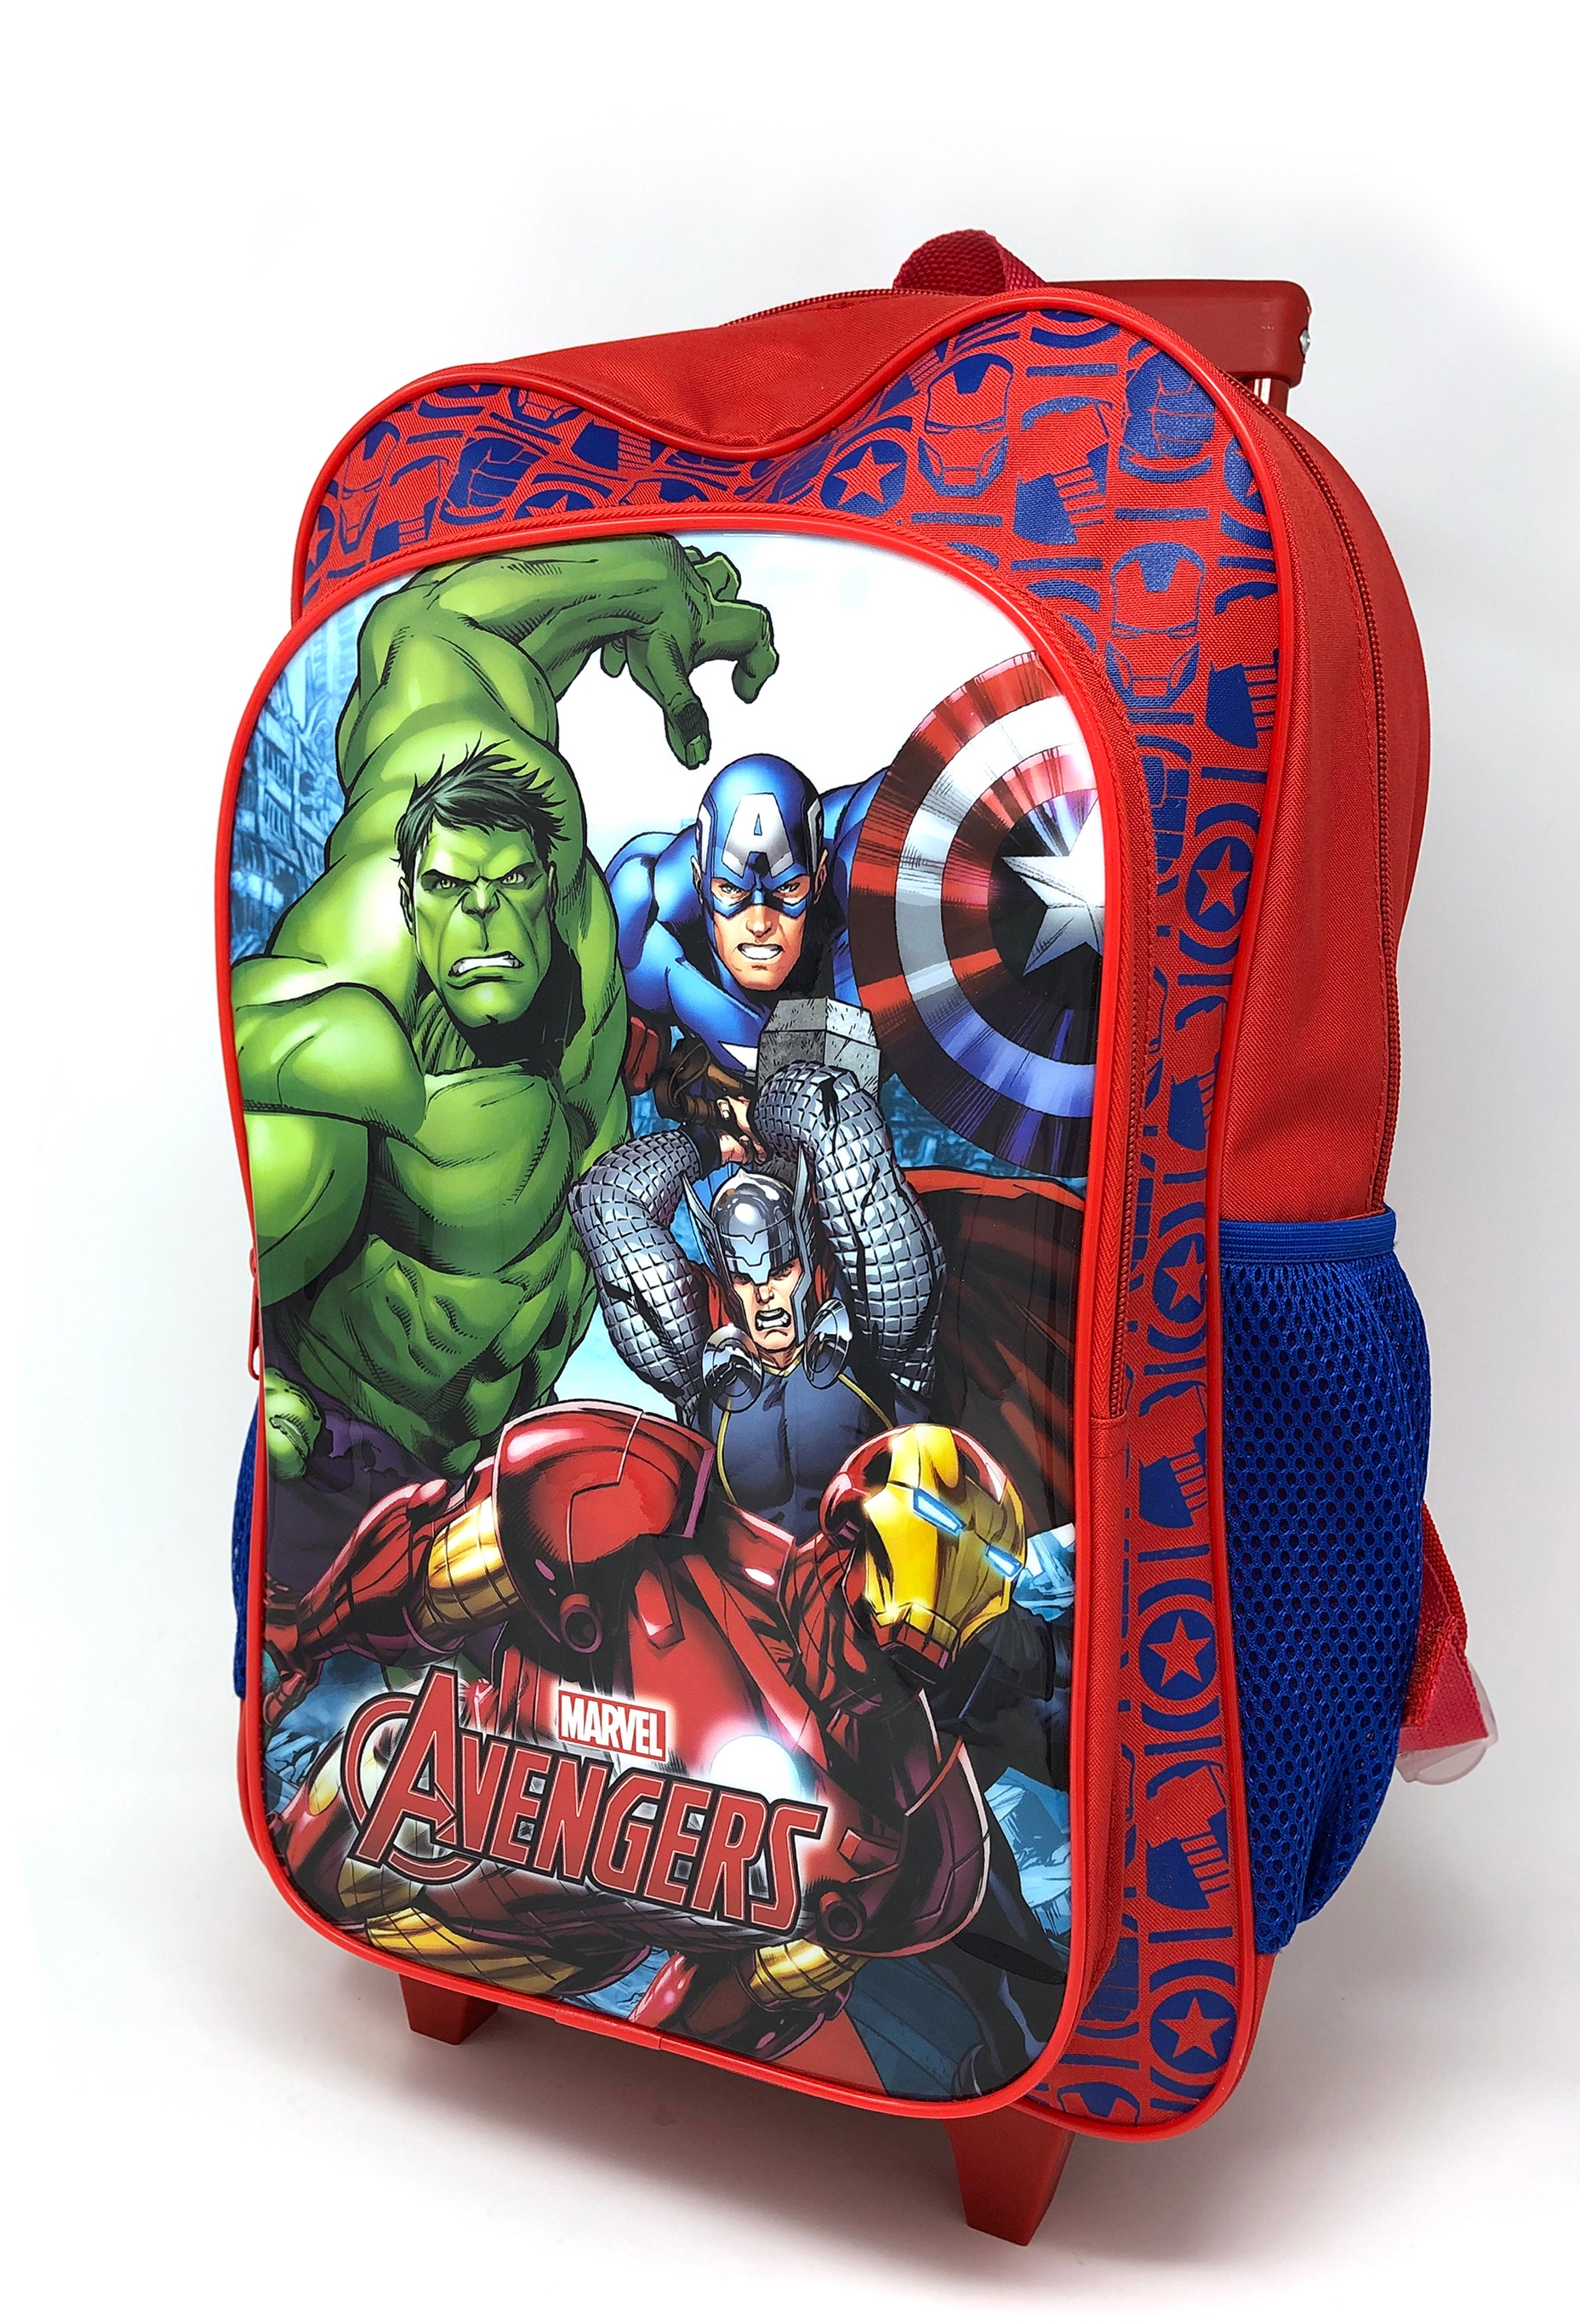 Marvel Avengers Luggage Deluxe School Travel Trolley Roller Wheeled Bag